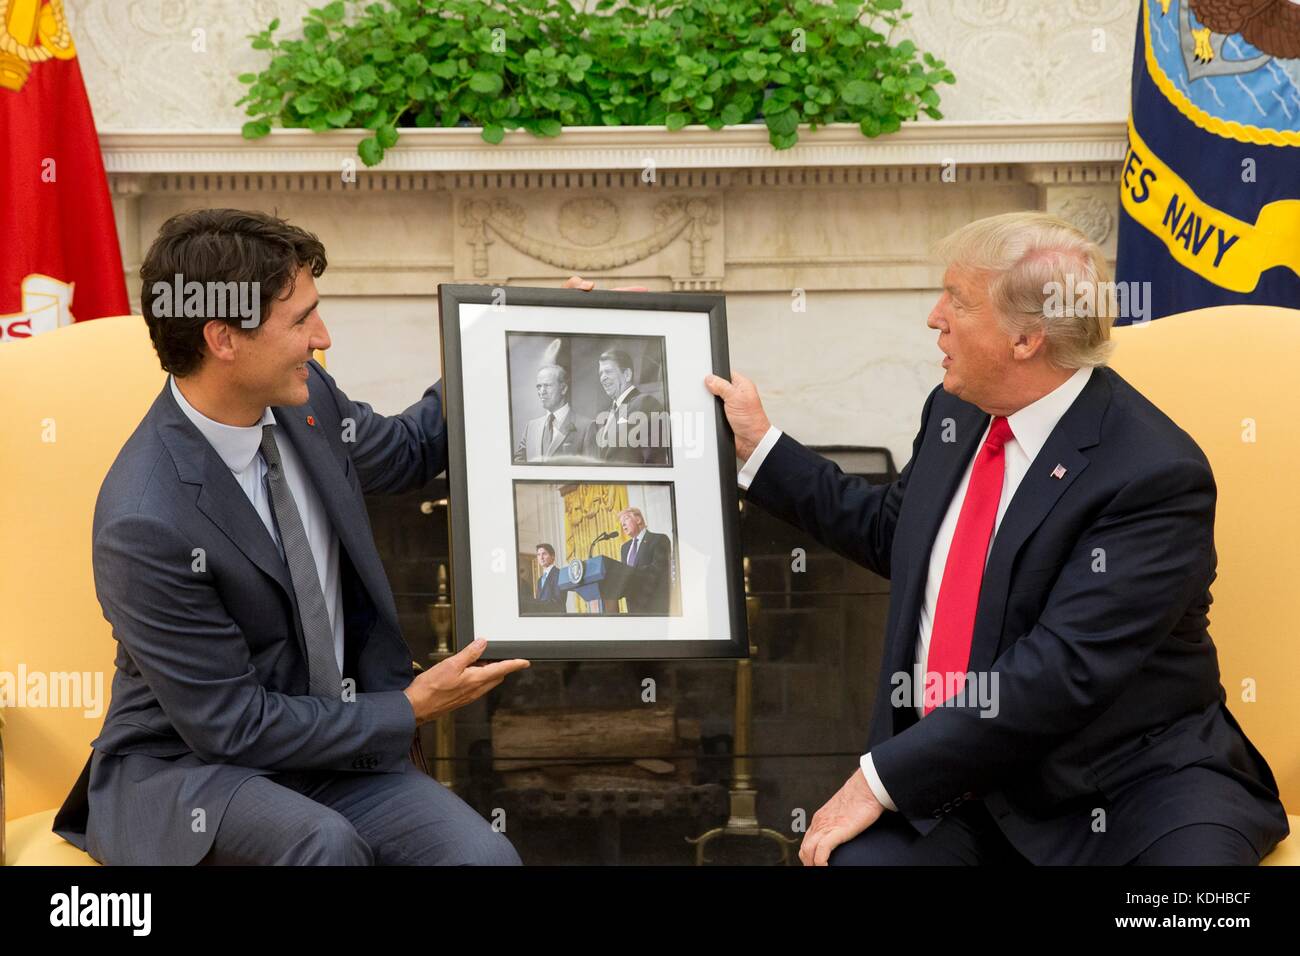 U.S. President Donald Trump is gifted a framed photo by Canadian Prime Minister Justin Trudeau during their Oval Office meeting at the White House October 11, 2017 in Washington, D.C. The photos show Trudeau’s father Prime Minister Pierre Trudeau meeting President Ronald Reagan in 1983, and a photo of President Trump and Prime Minister Trudeau meeting earlier this year. Stock Photo